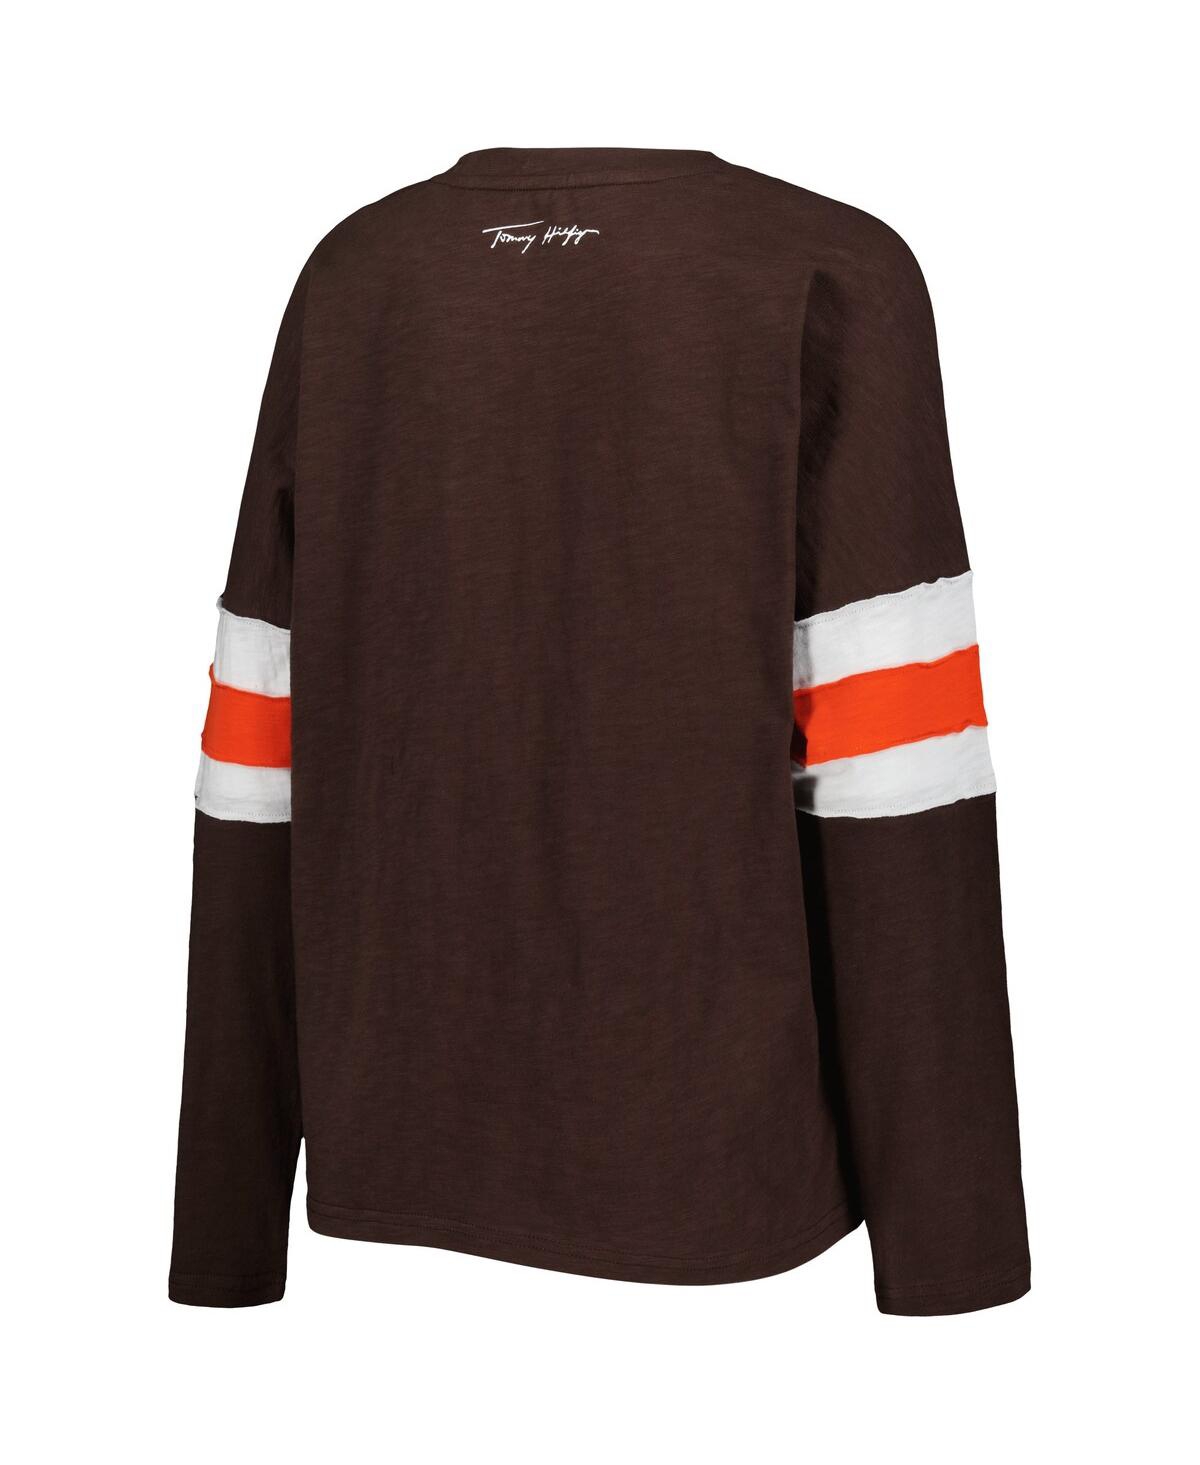 Shop Tommy Hilfiger Women's  Brown Cleveland Browns Justine Long Sleeve Tunic T-shirt